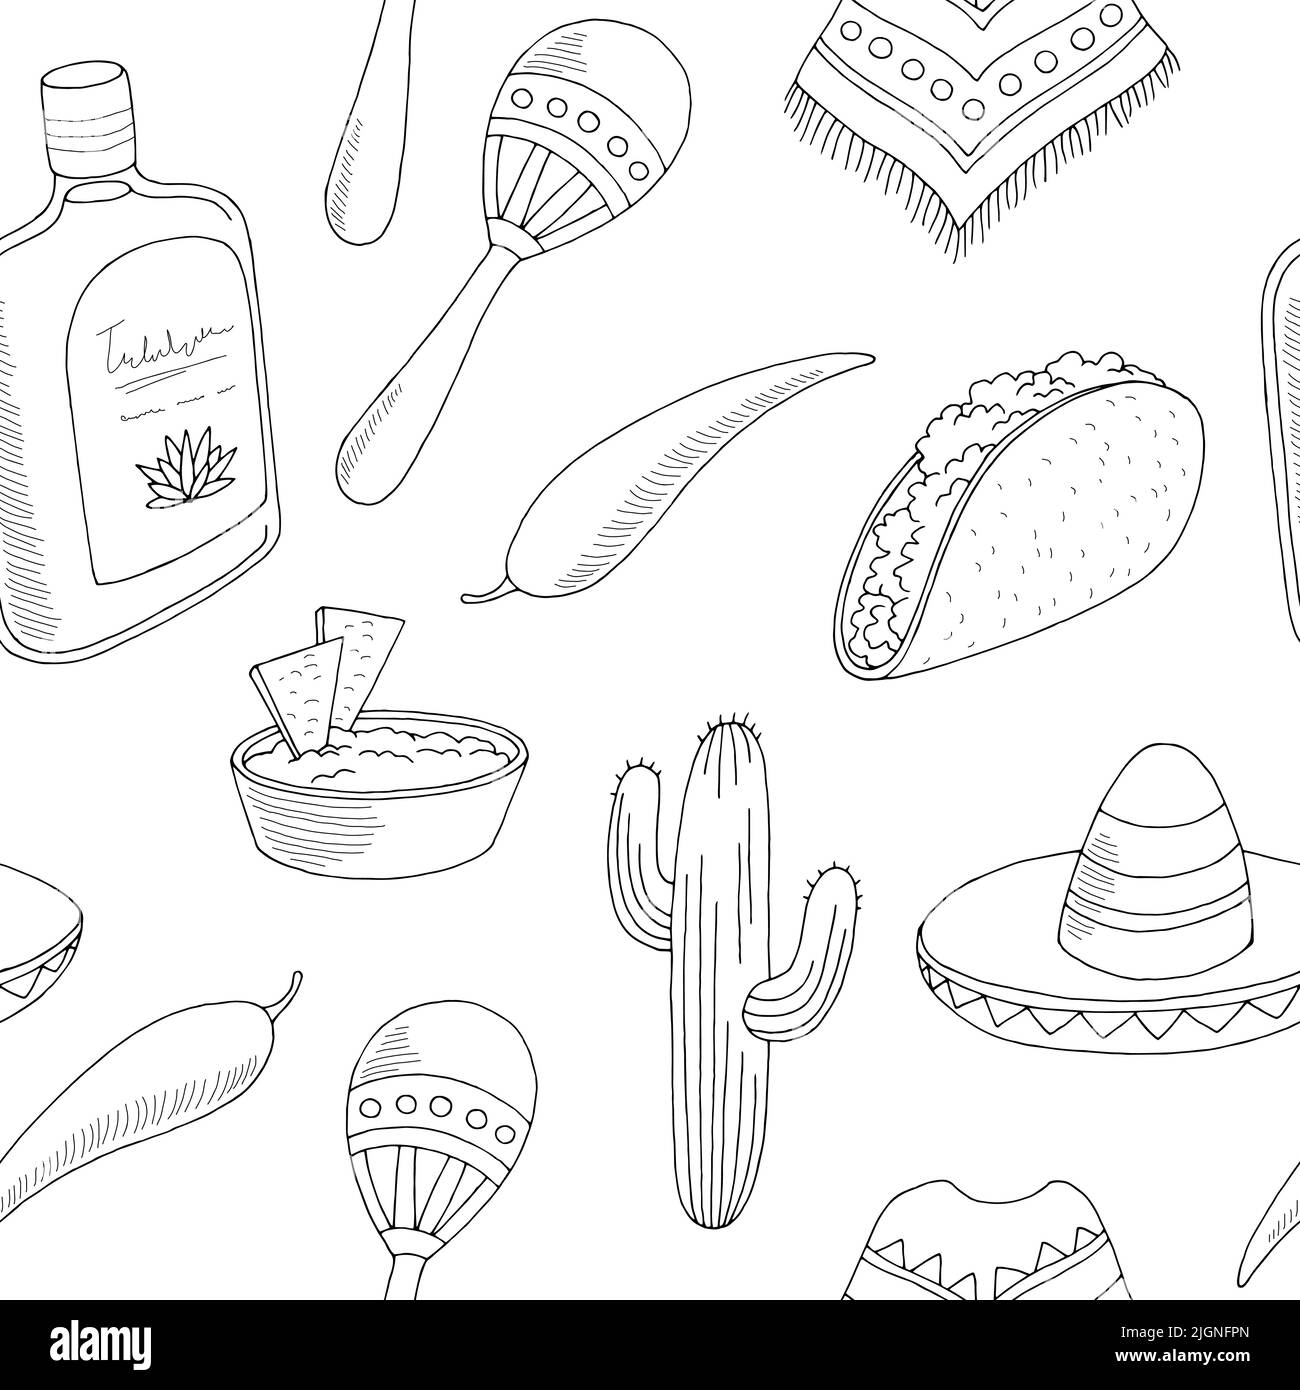 Mexico seamless pattern background graphic black white sketch illustration vector Stock Vector